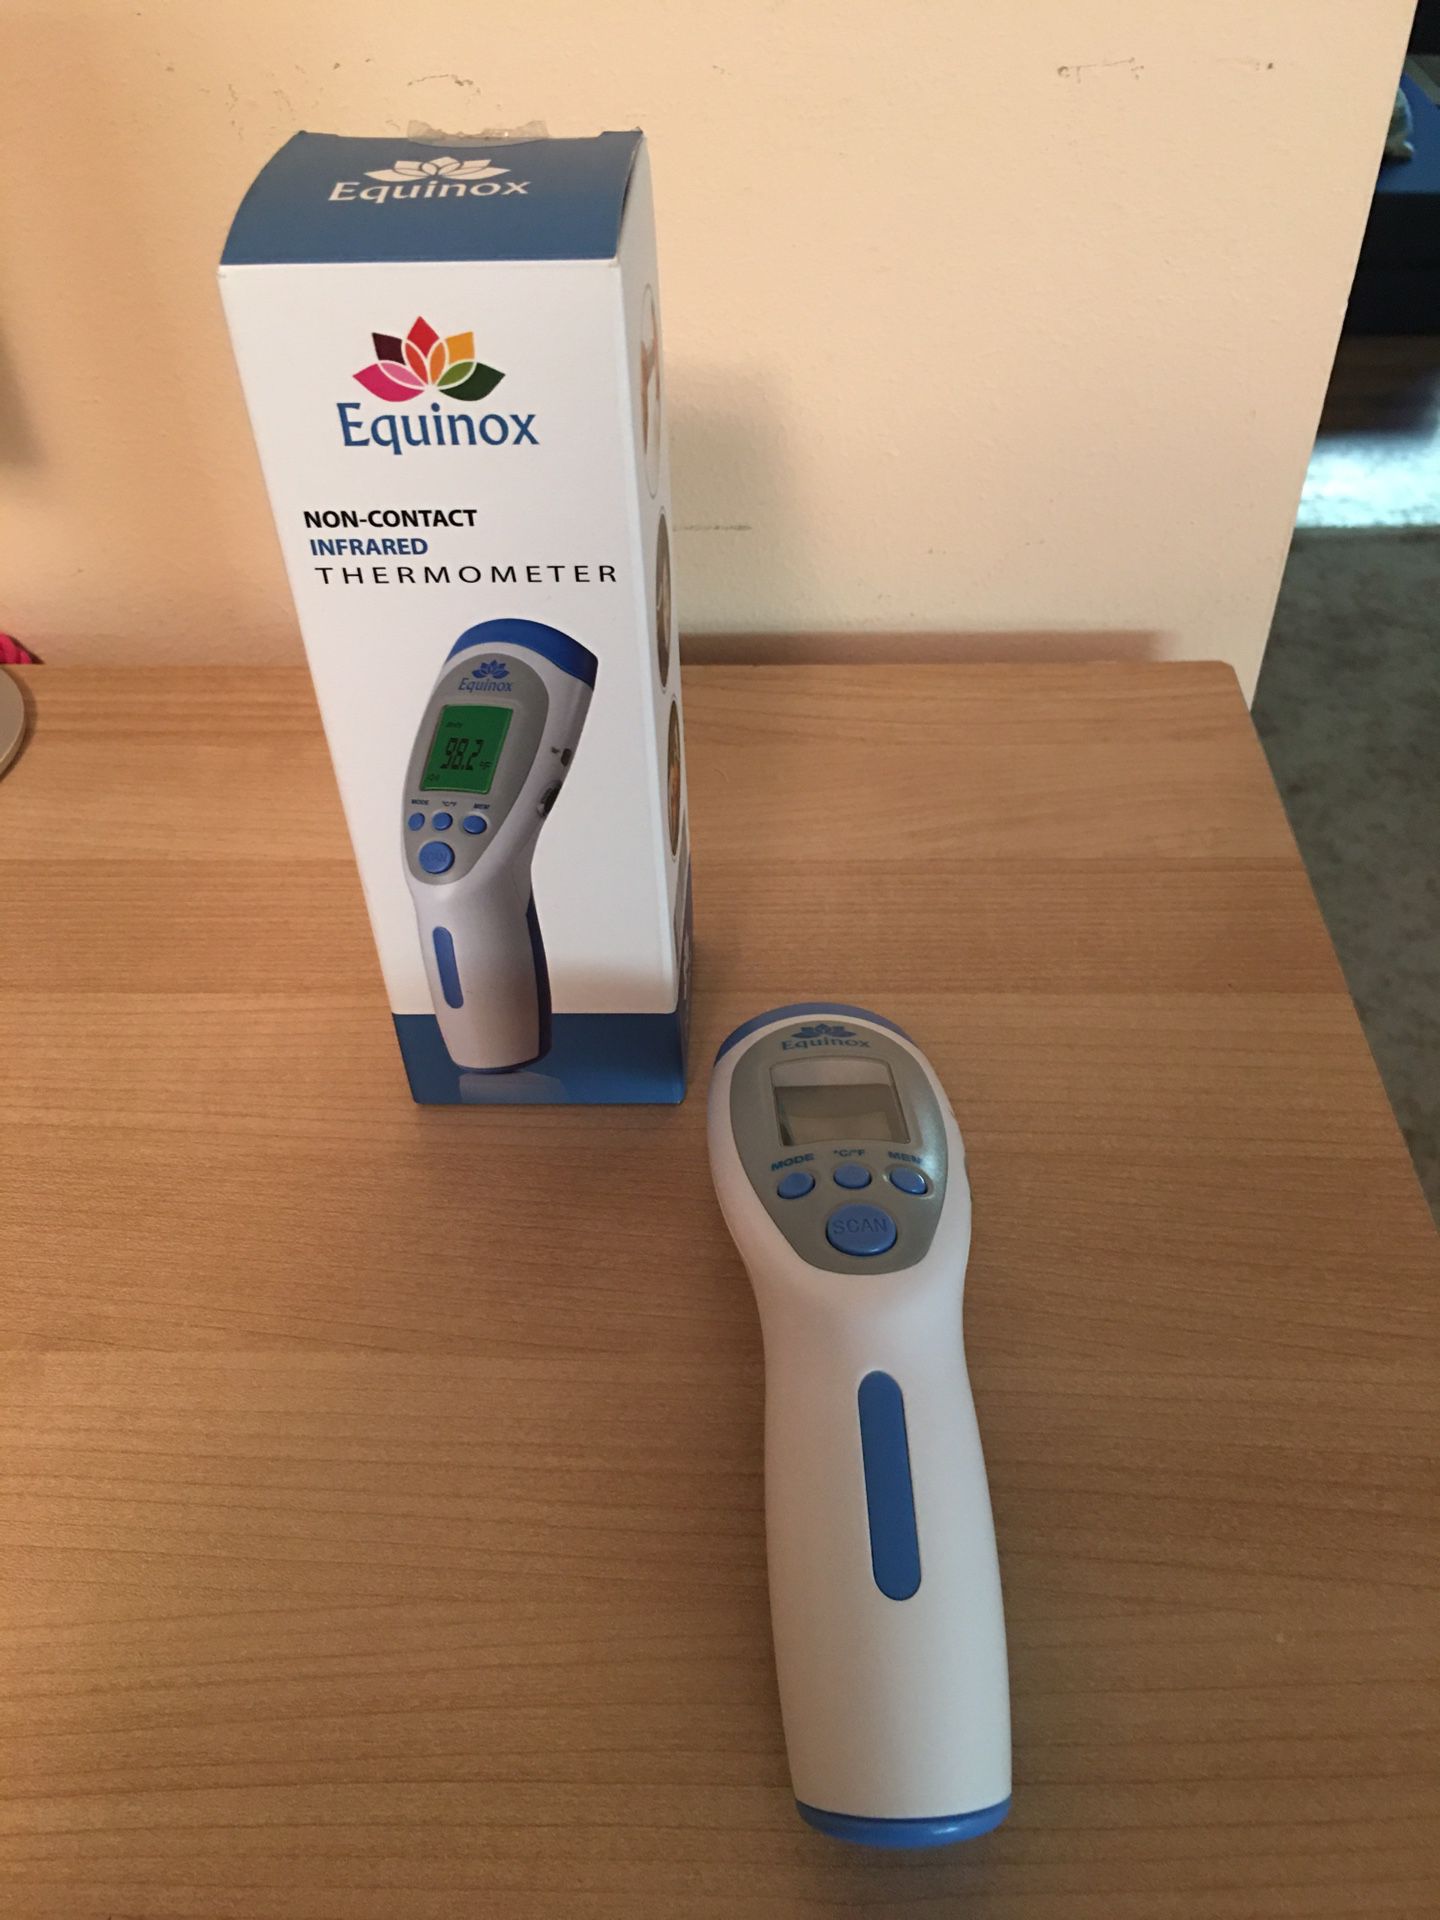 Non-Contact Equinox Infrared Thermometer